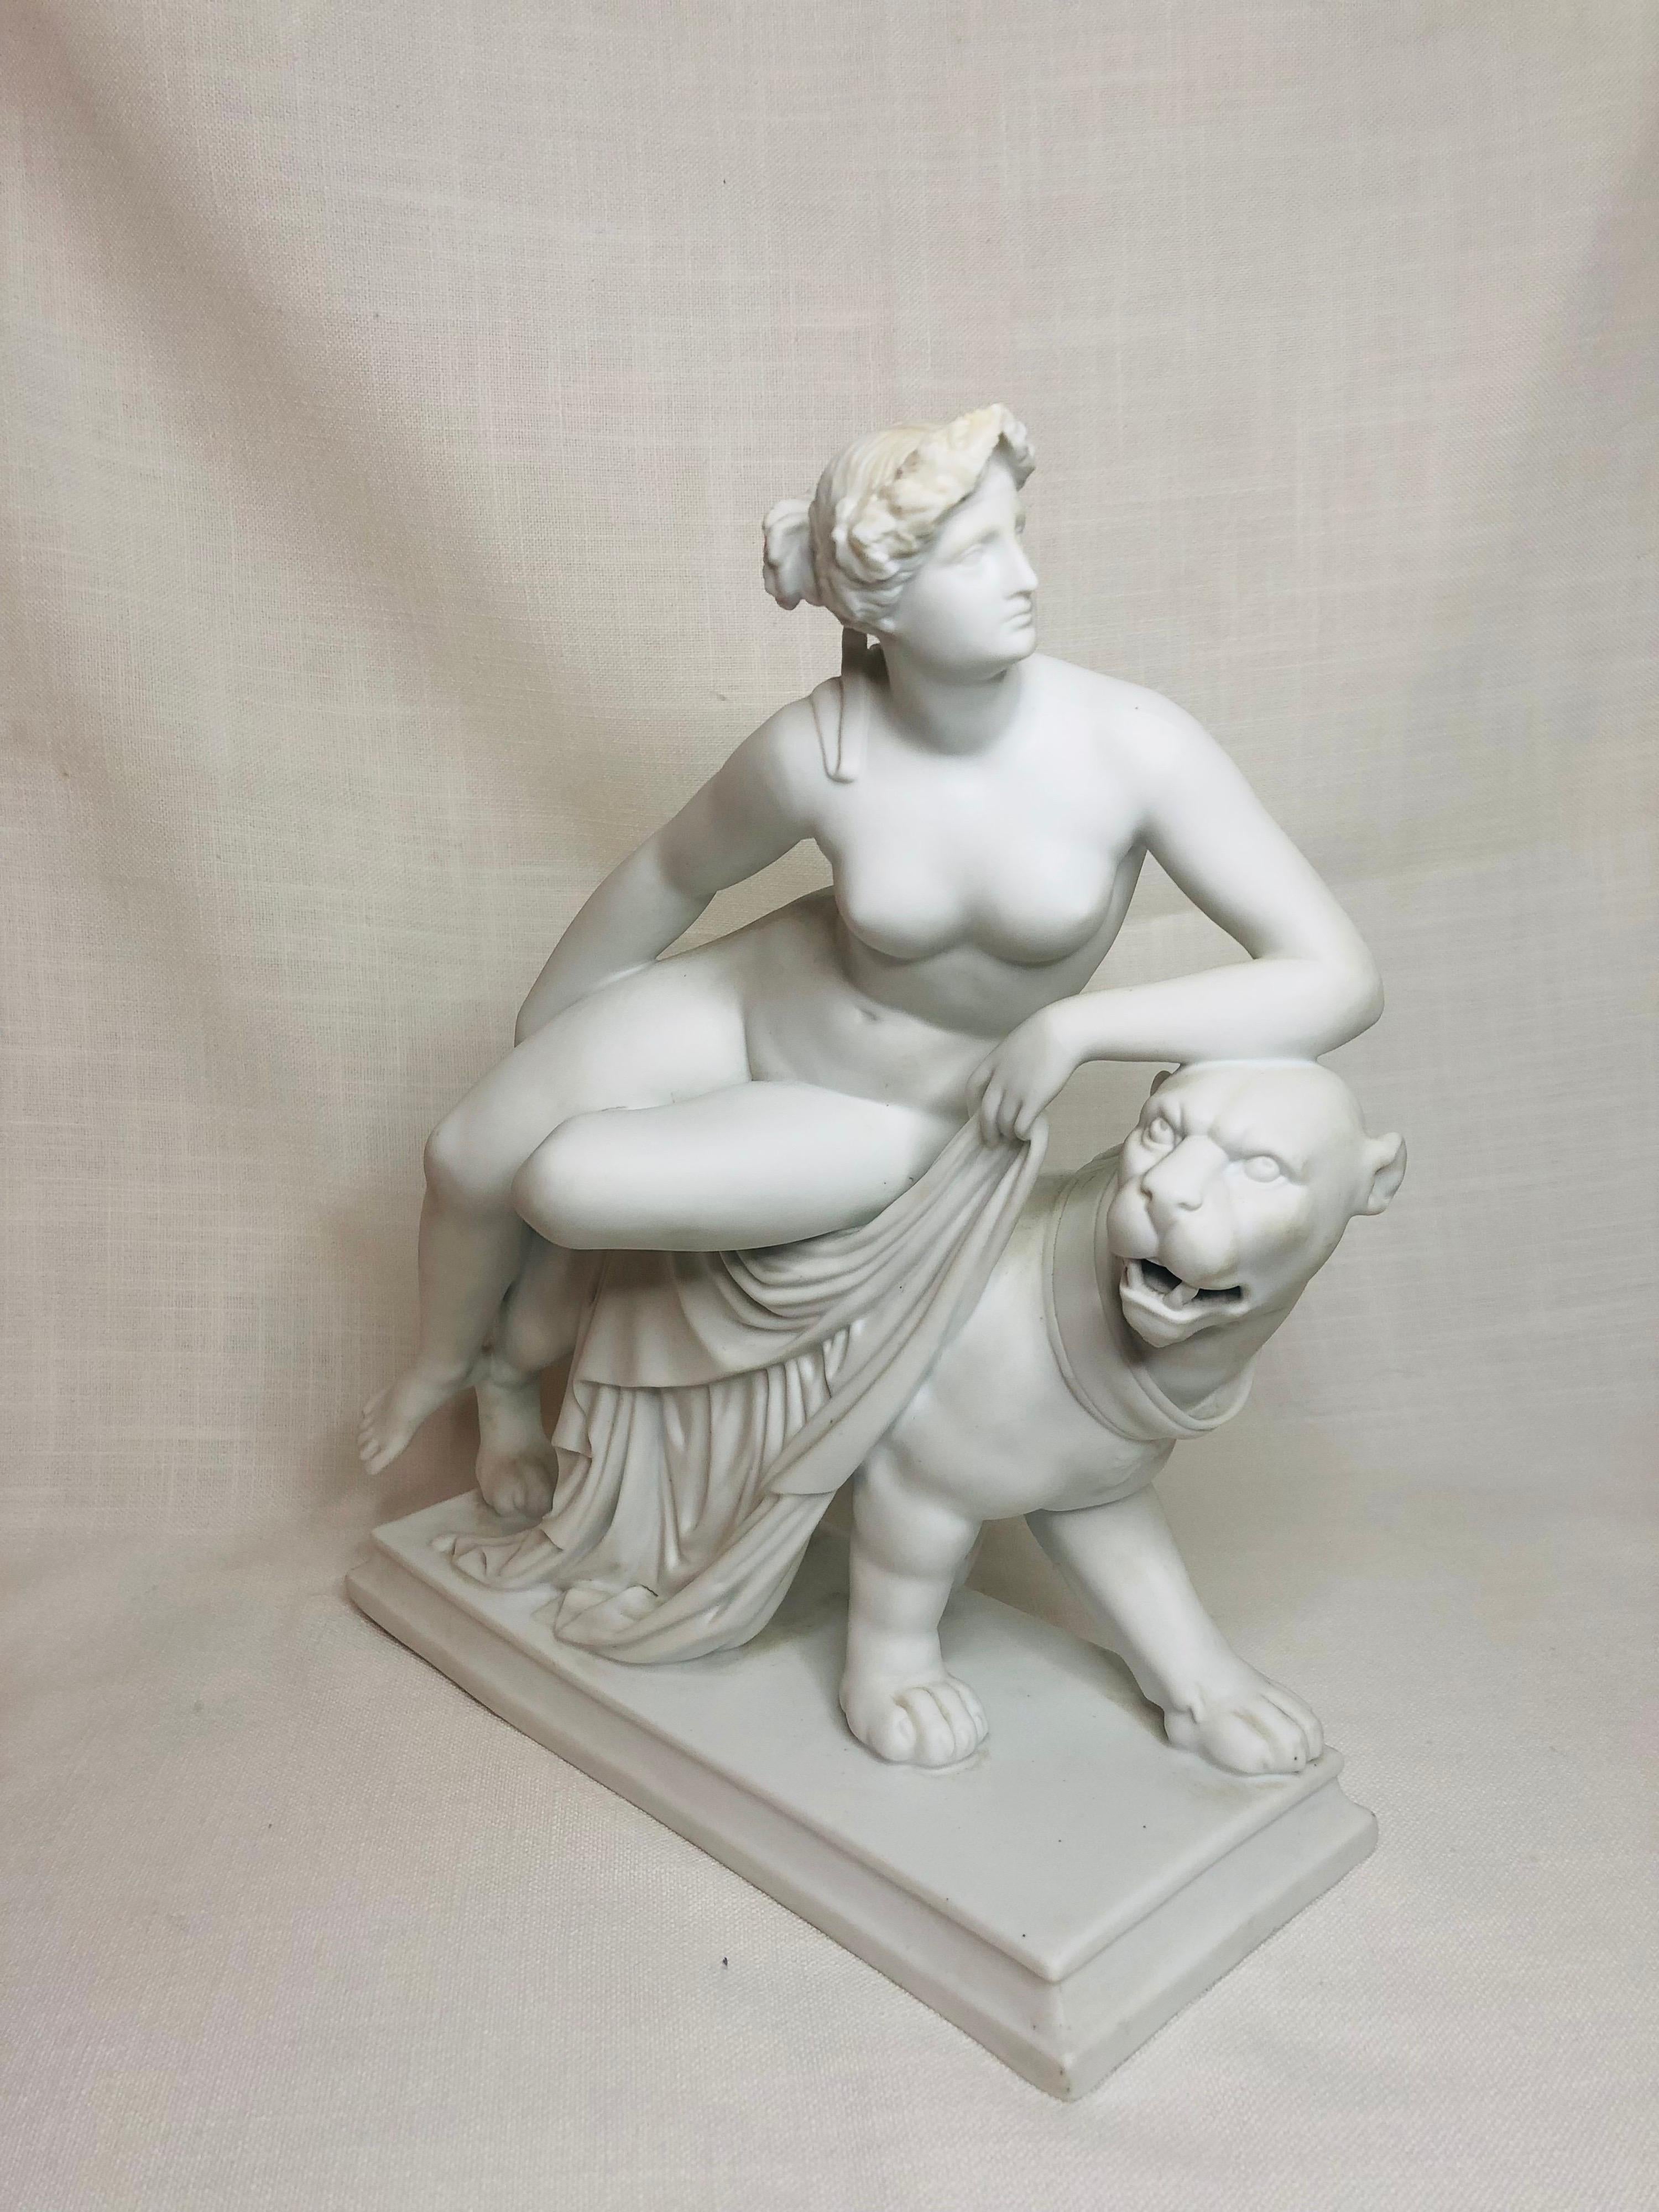 Porcelain English Parian Figurine of a Nude Figure of Adriadne Riding on Top of a Panther